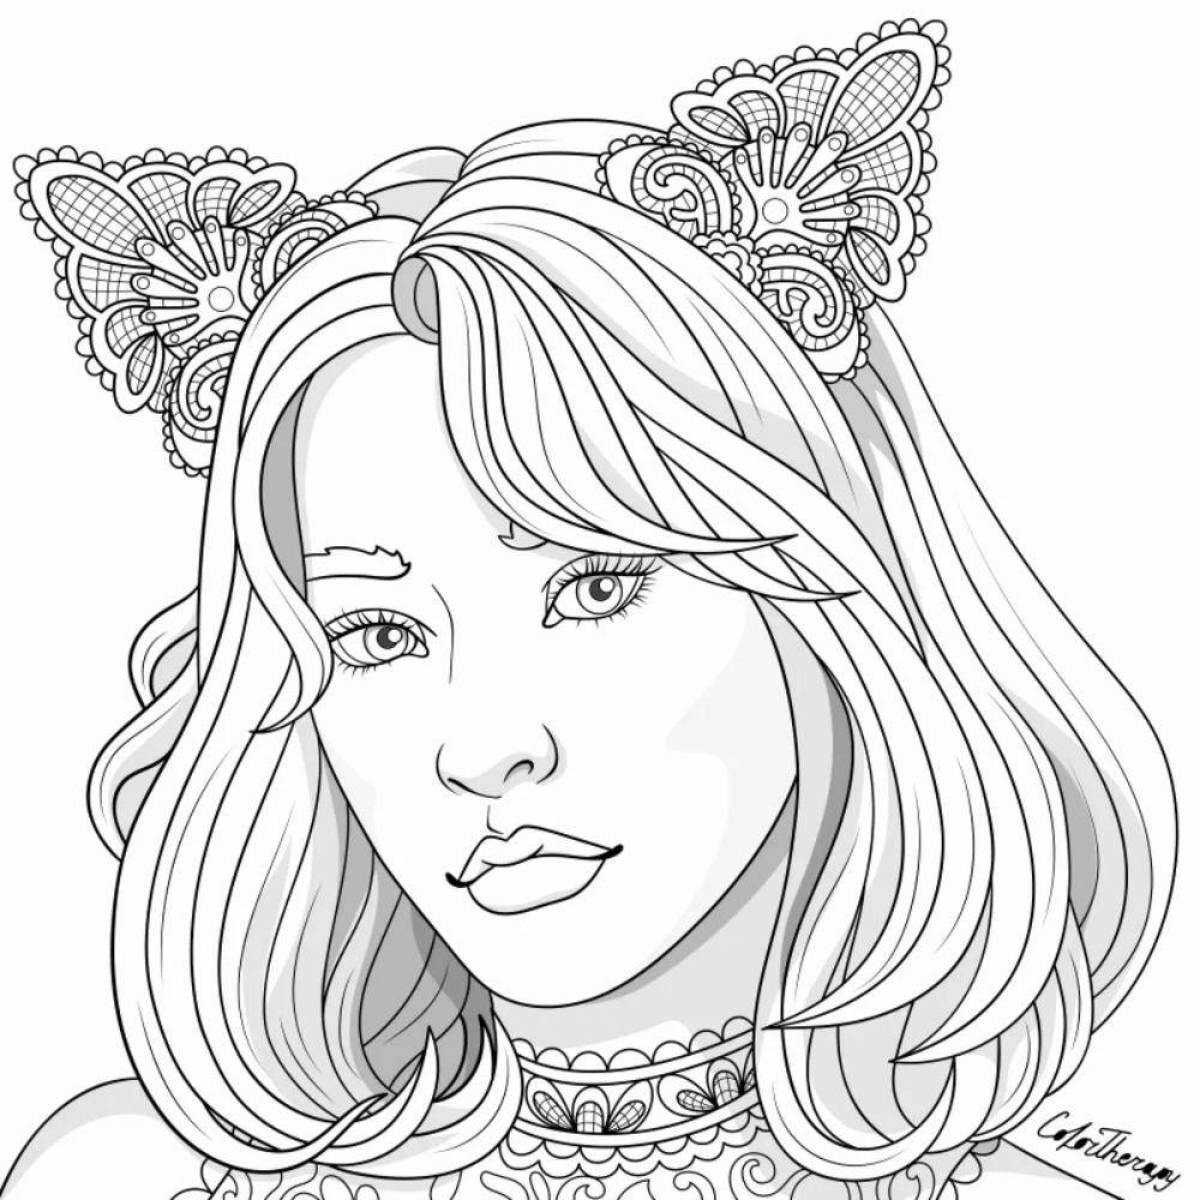 Elegant coloring book for girls 9-10 years old